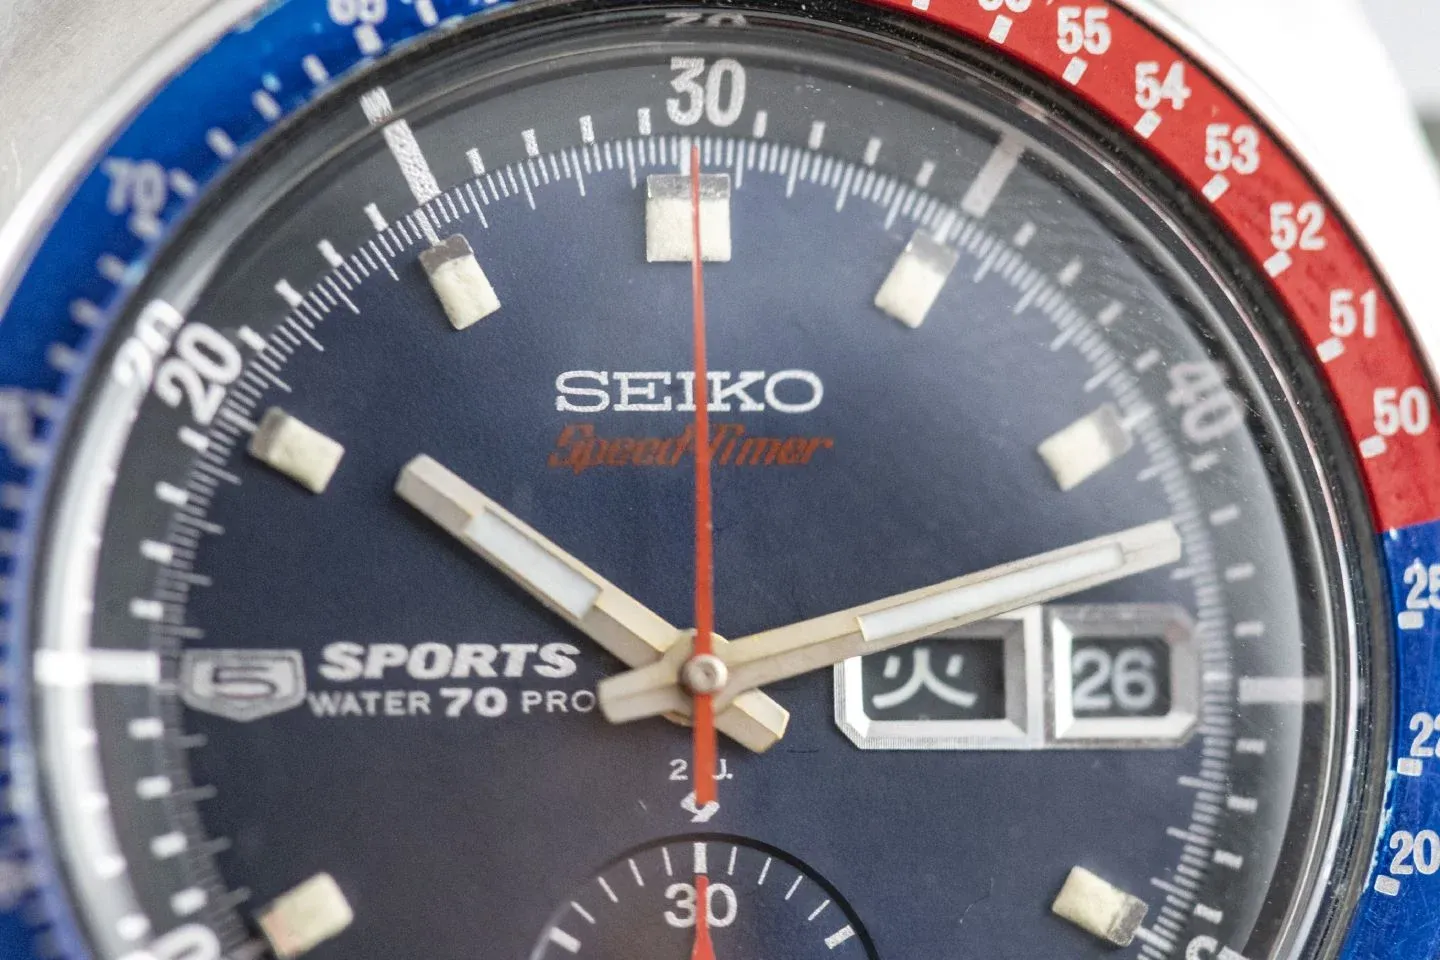 The day and date function integration with the already complicated chronograph movement was an impressive feat by Seiko